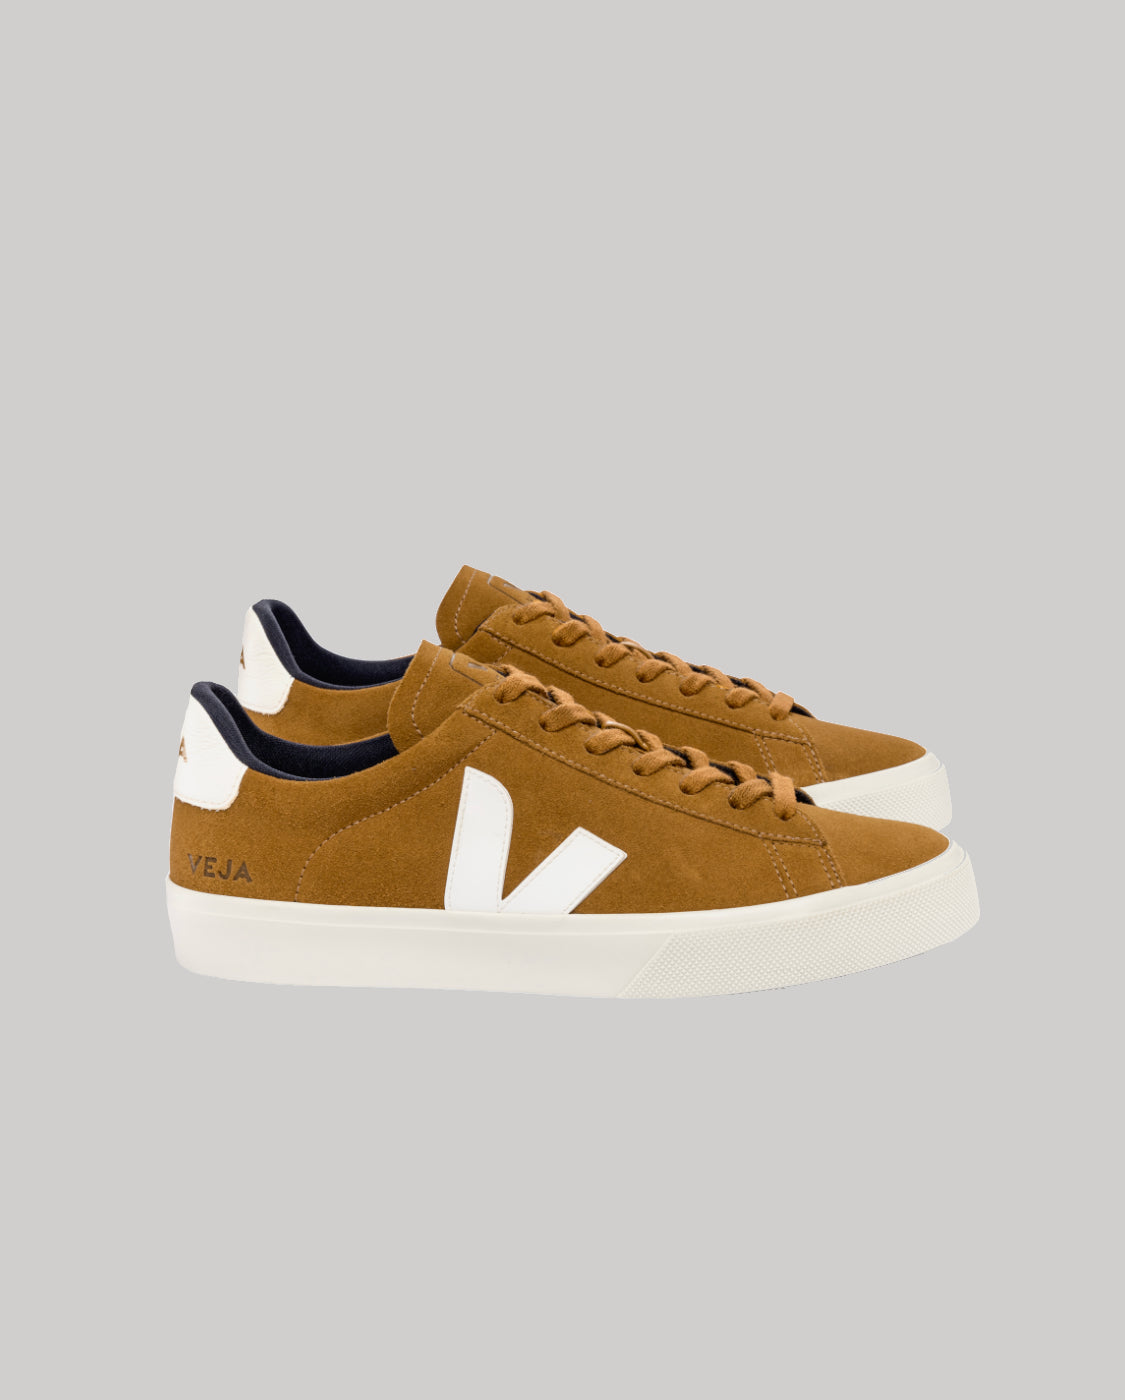 Veja Suede Camel White Campo Sneakers